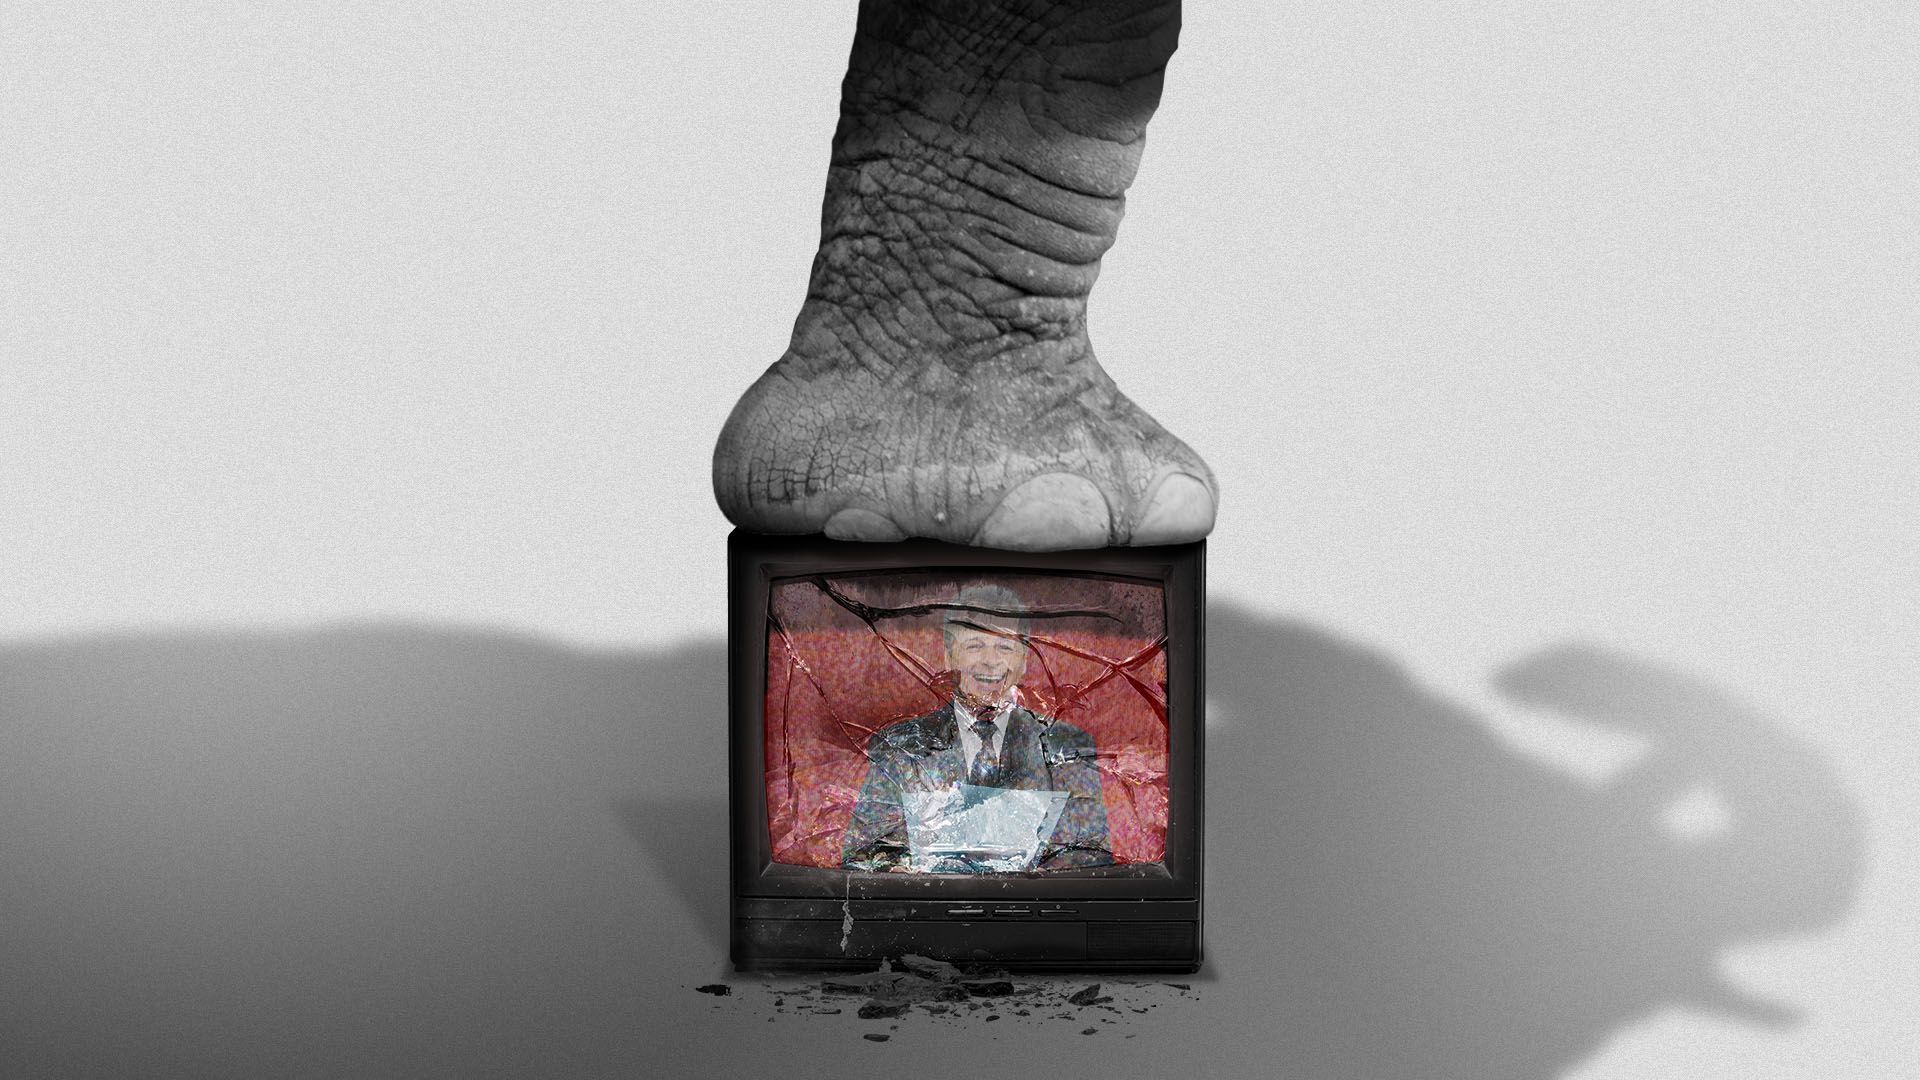 Illustration of an elephant stepping on and breaking  a television with a news anchor on the screen